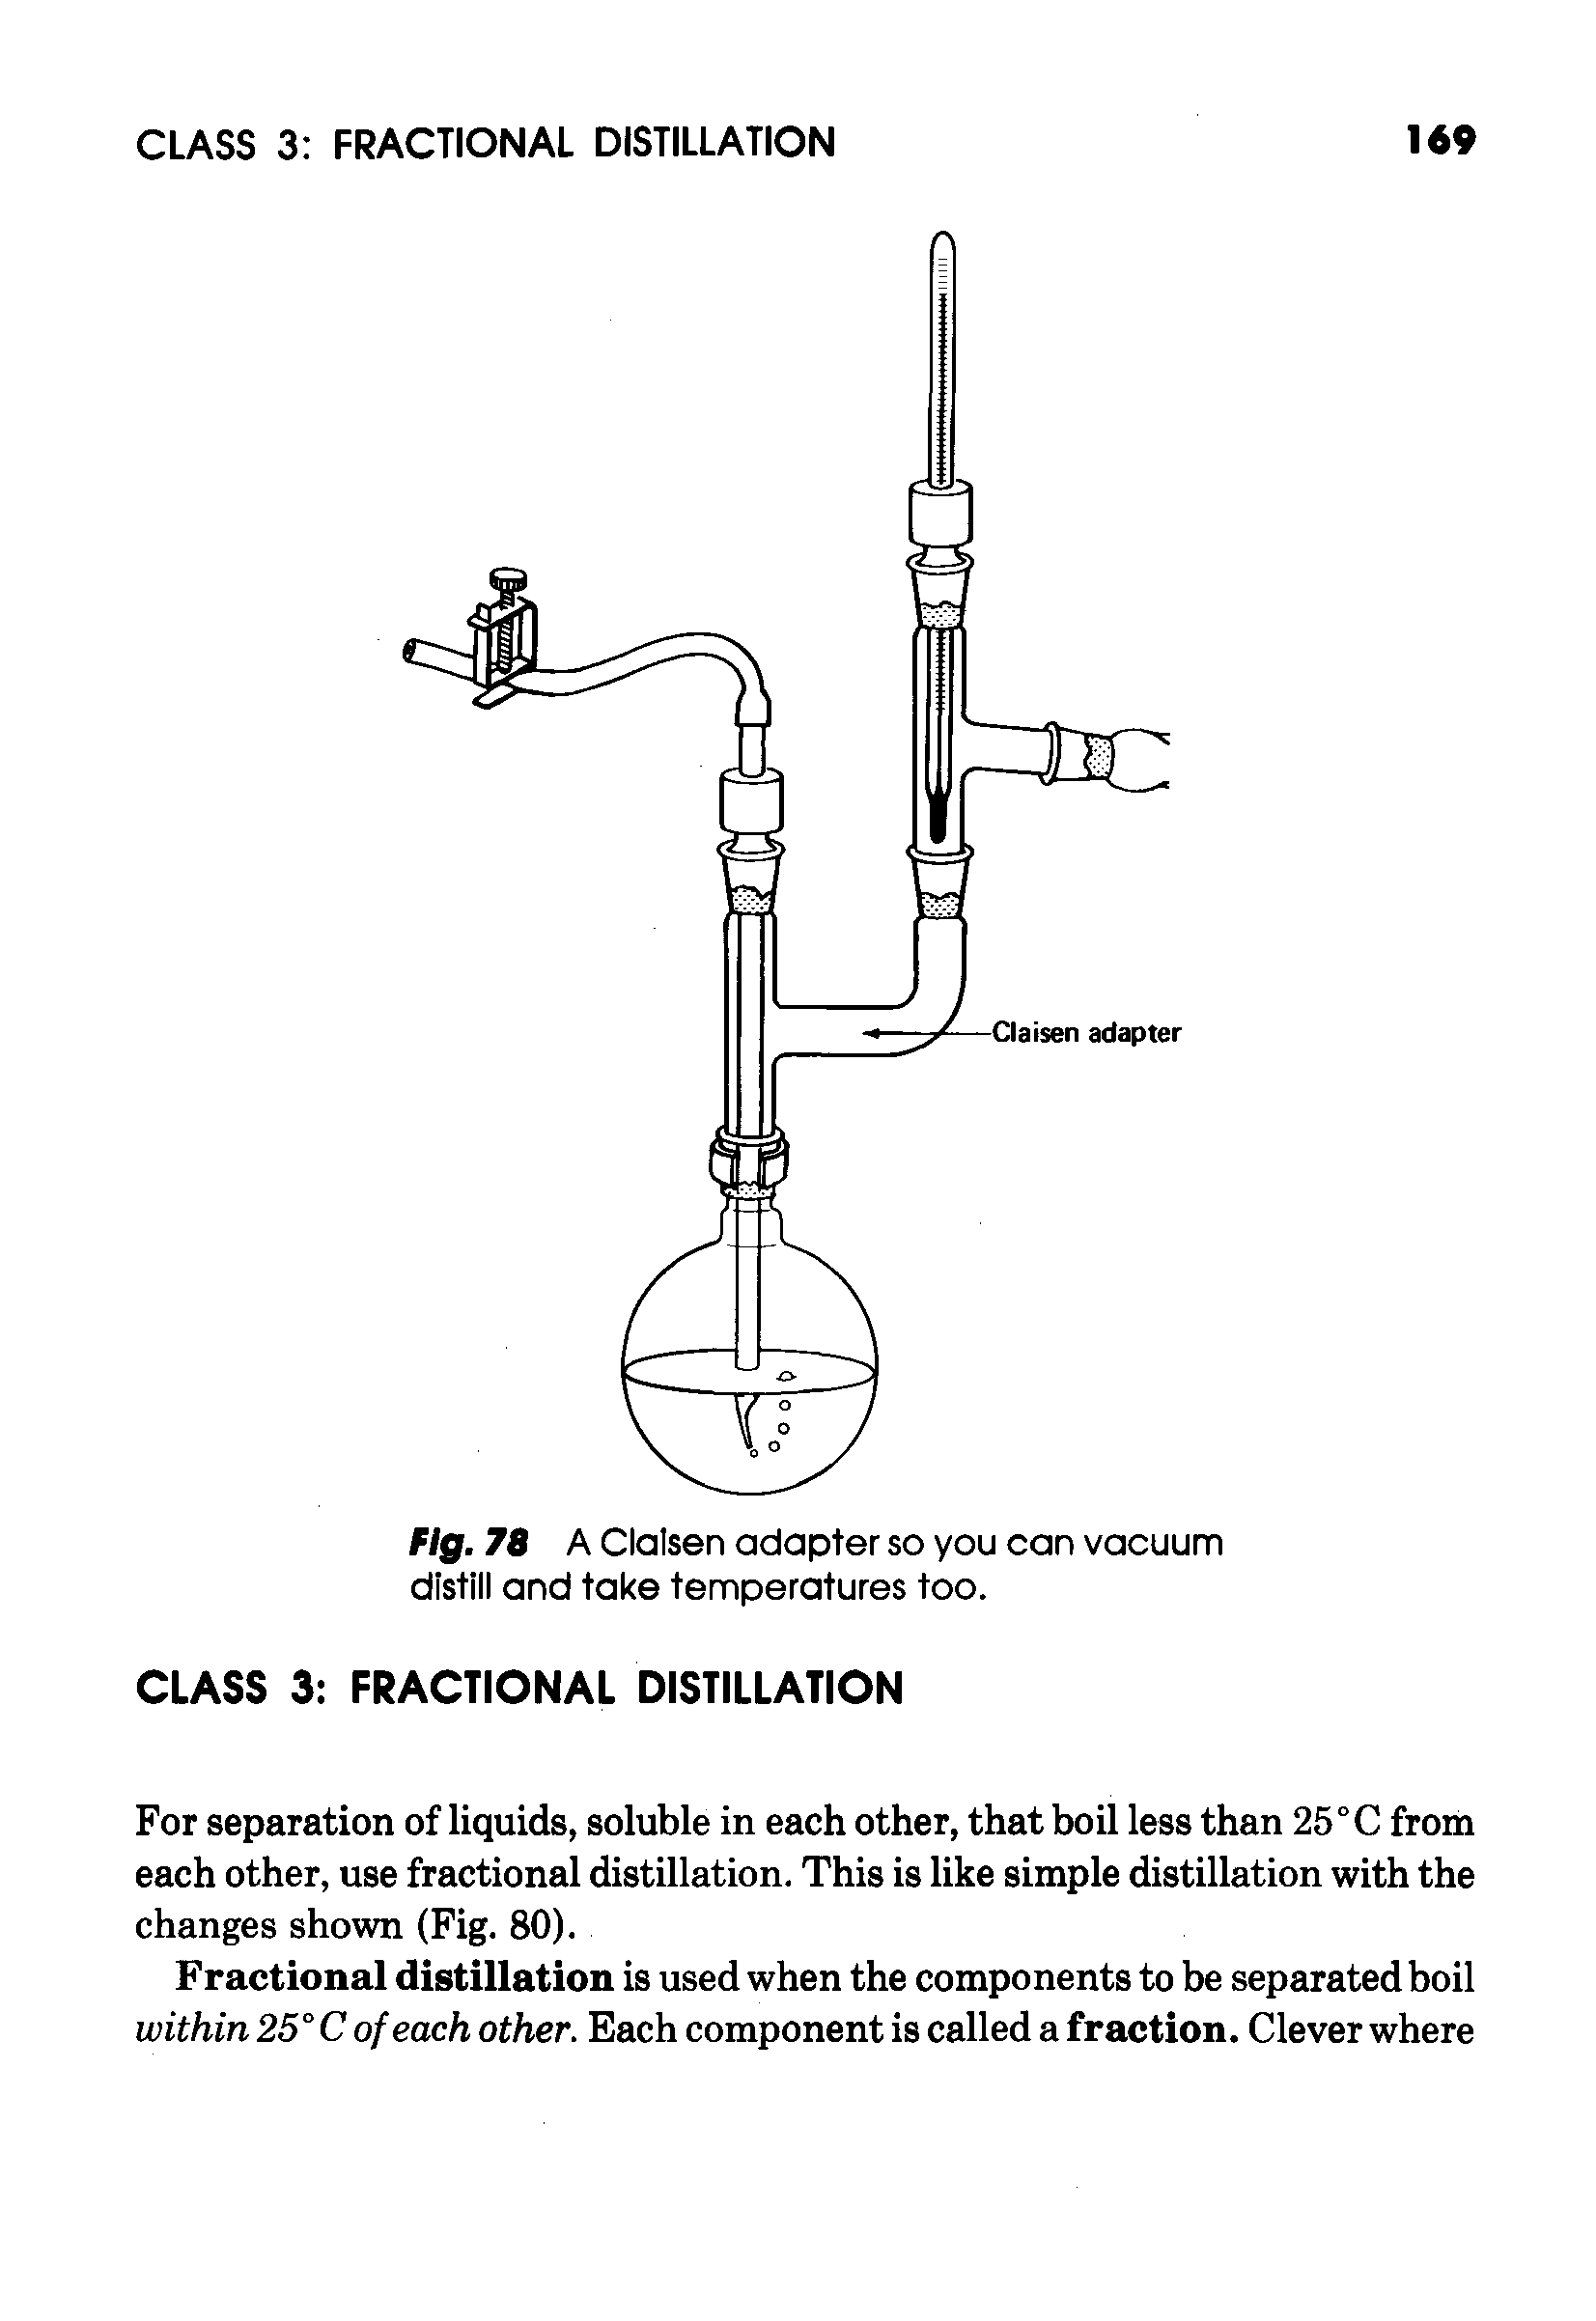 Fig. 78 A Clalsen adapter so you can vacuum distill and take temperatures too.